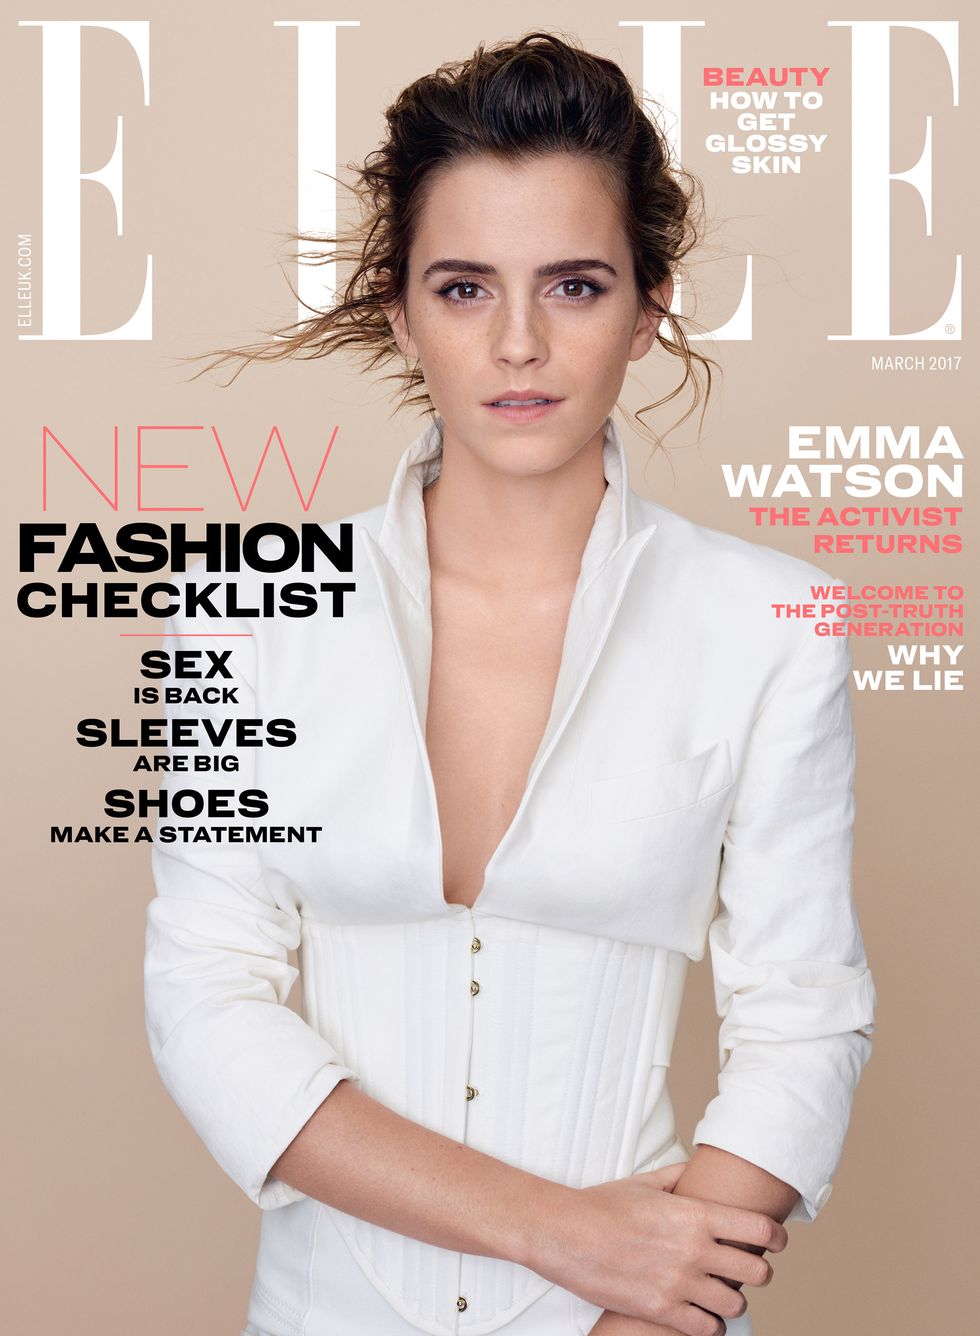 Emma Watson on the cover of Elle UK